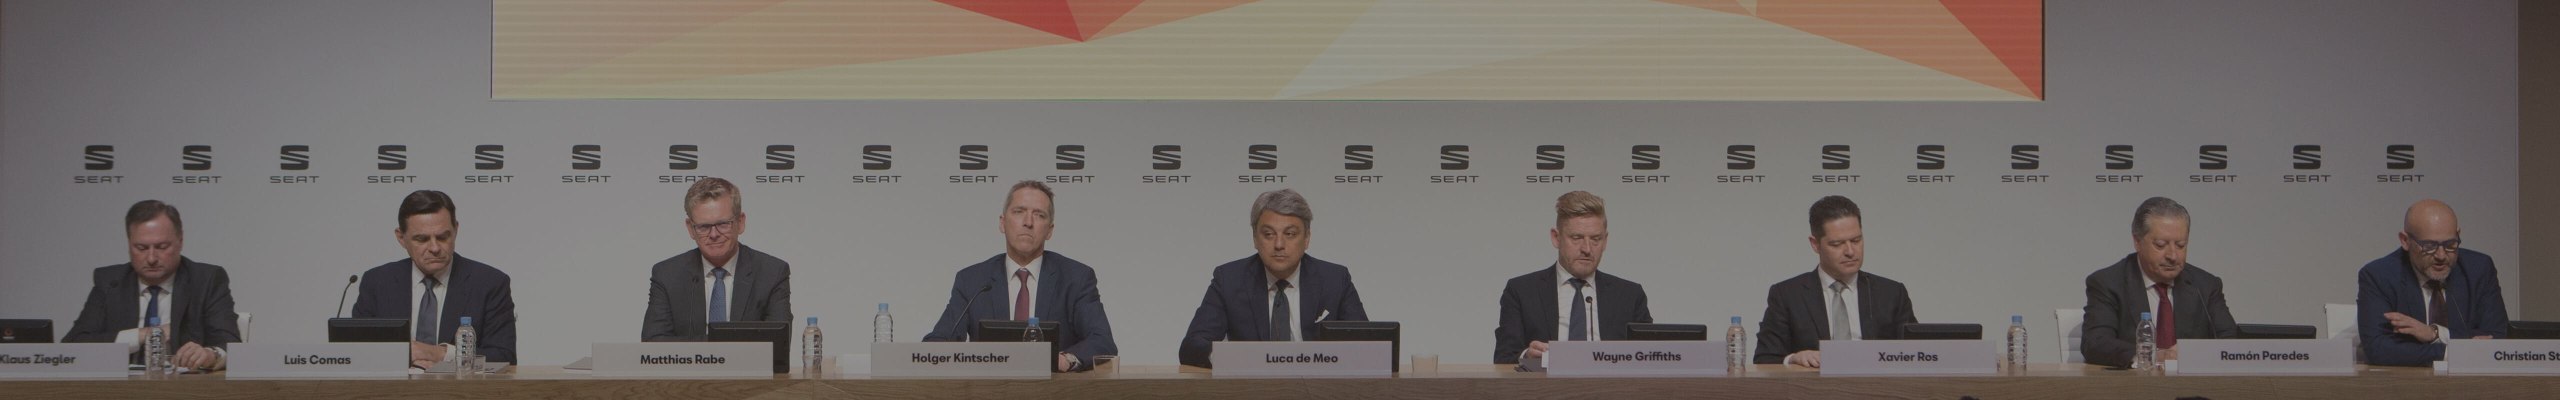 A year of records for SEAT - SEAT commitee of Directors. President and CEO Luca de Meo at SEAT Annual media conference 2018